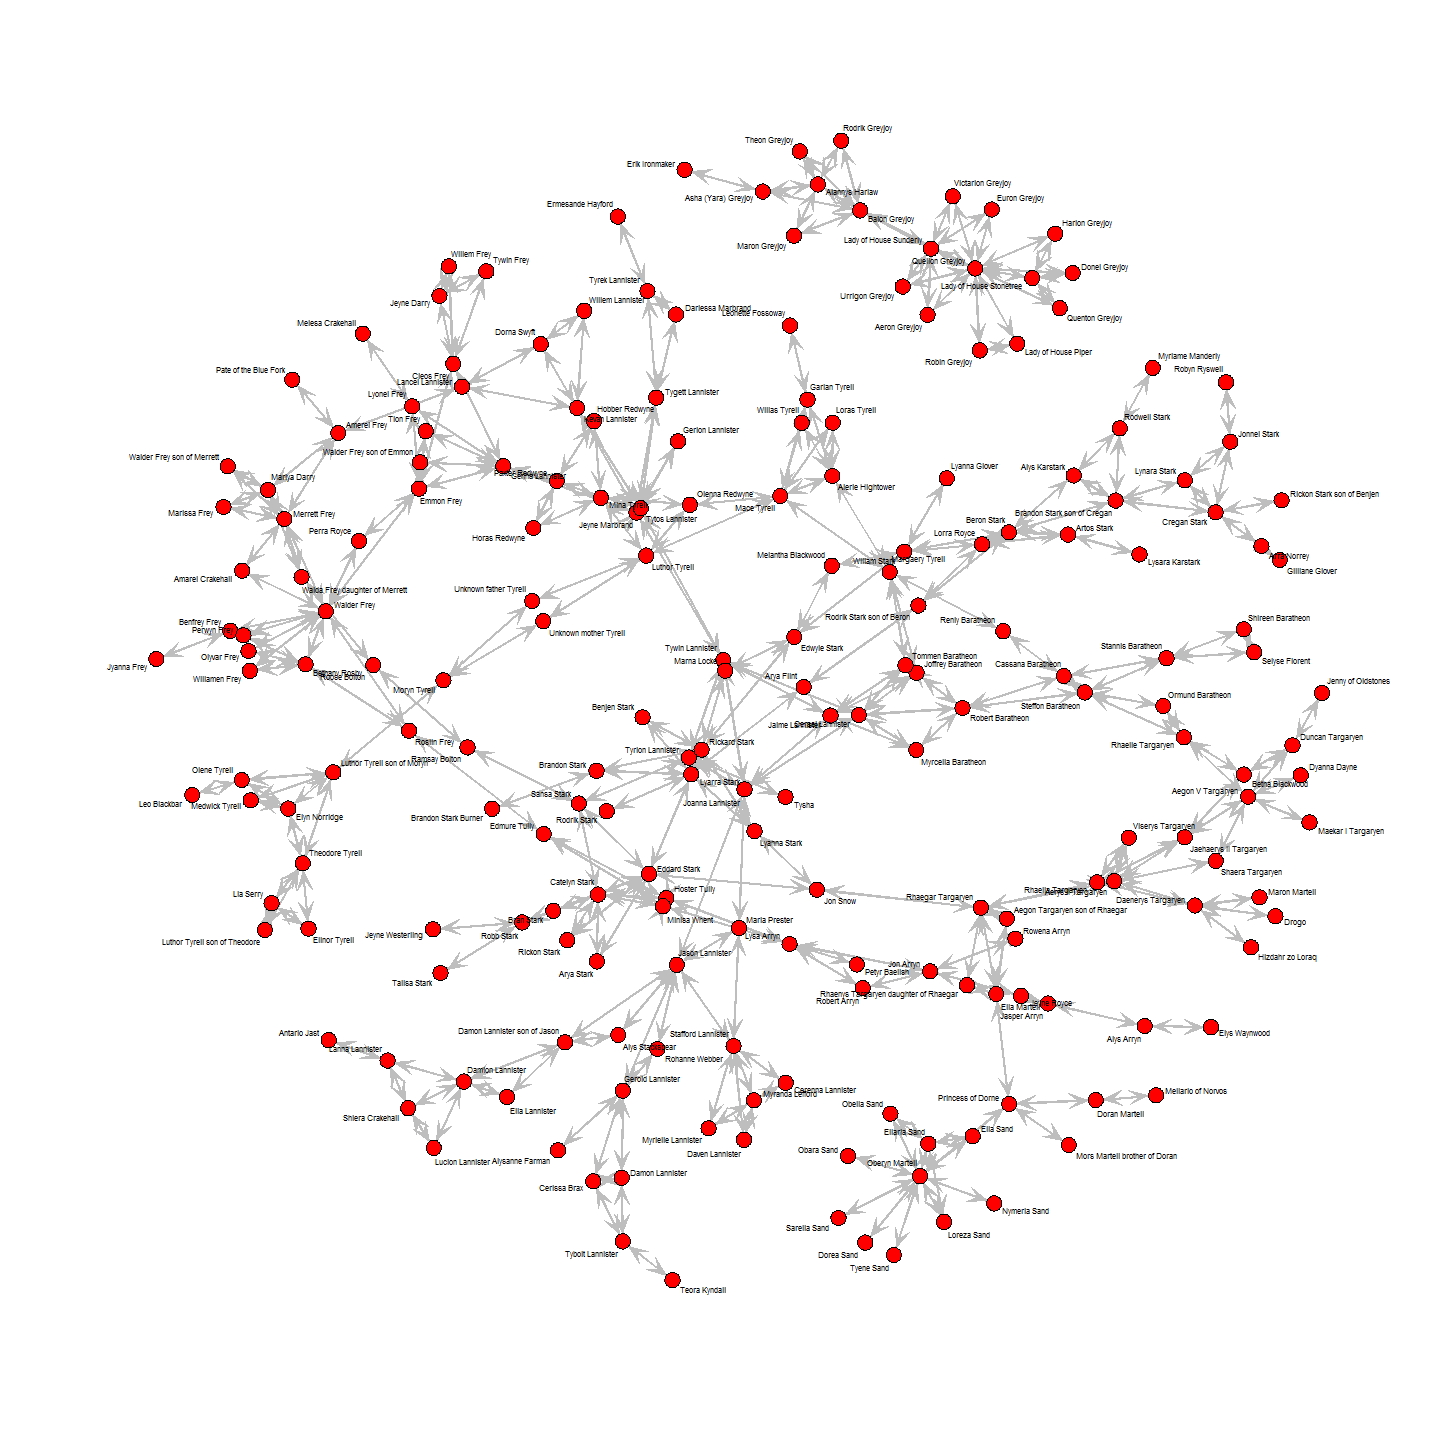 Network Analysis Of Game Of Thrones Family Ties R Bloggers